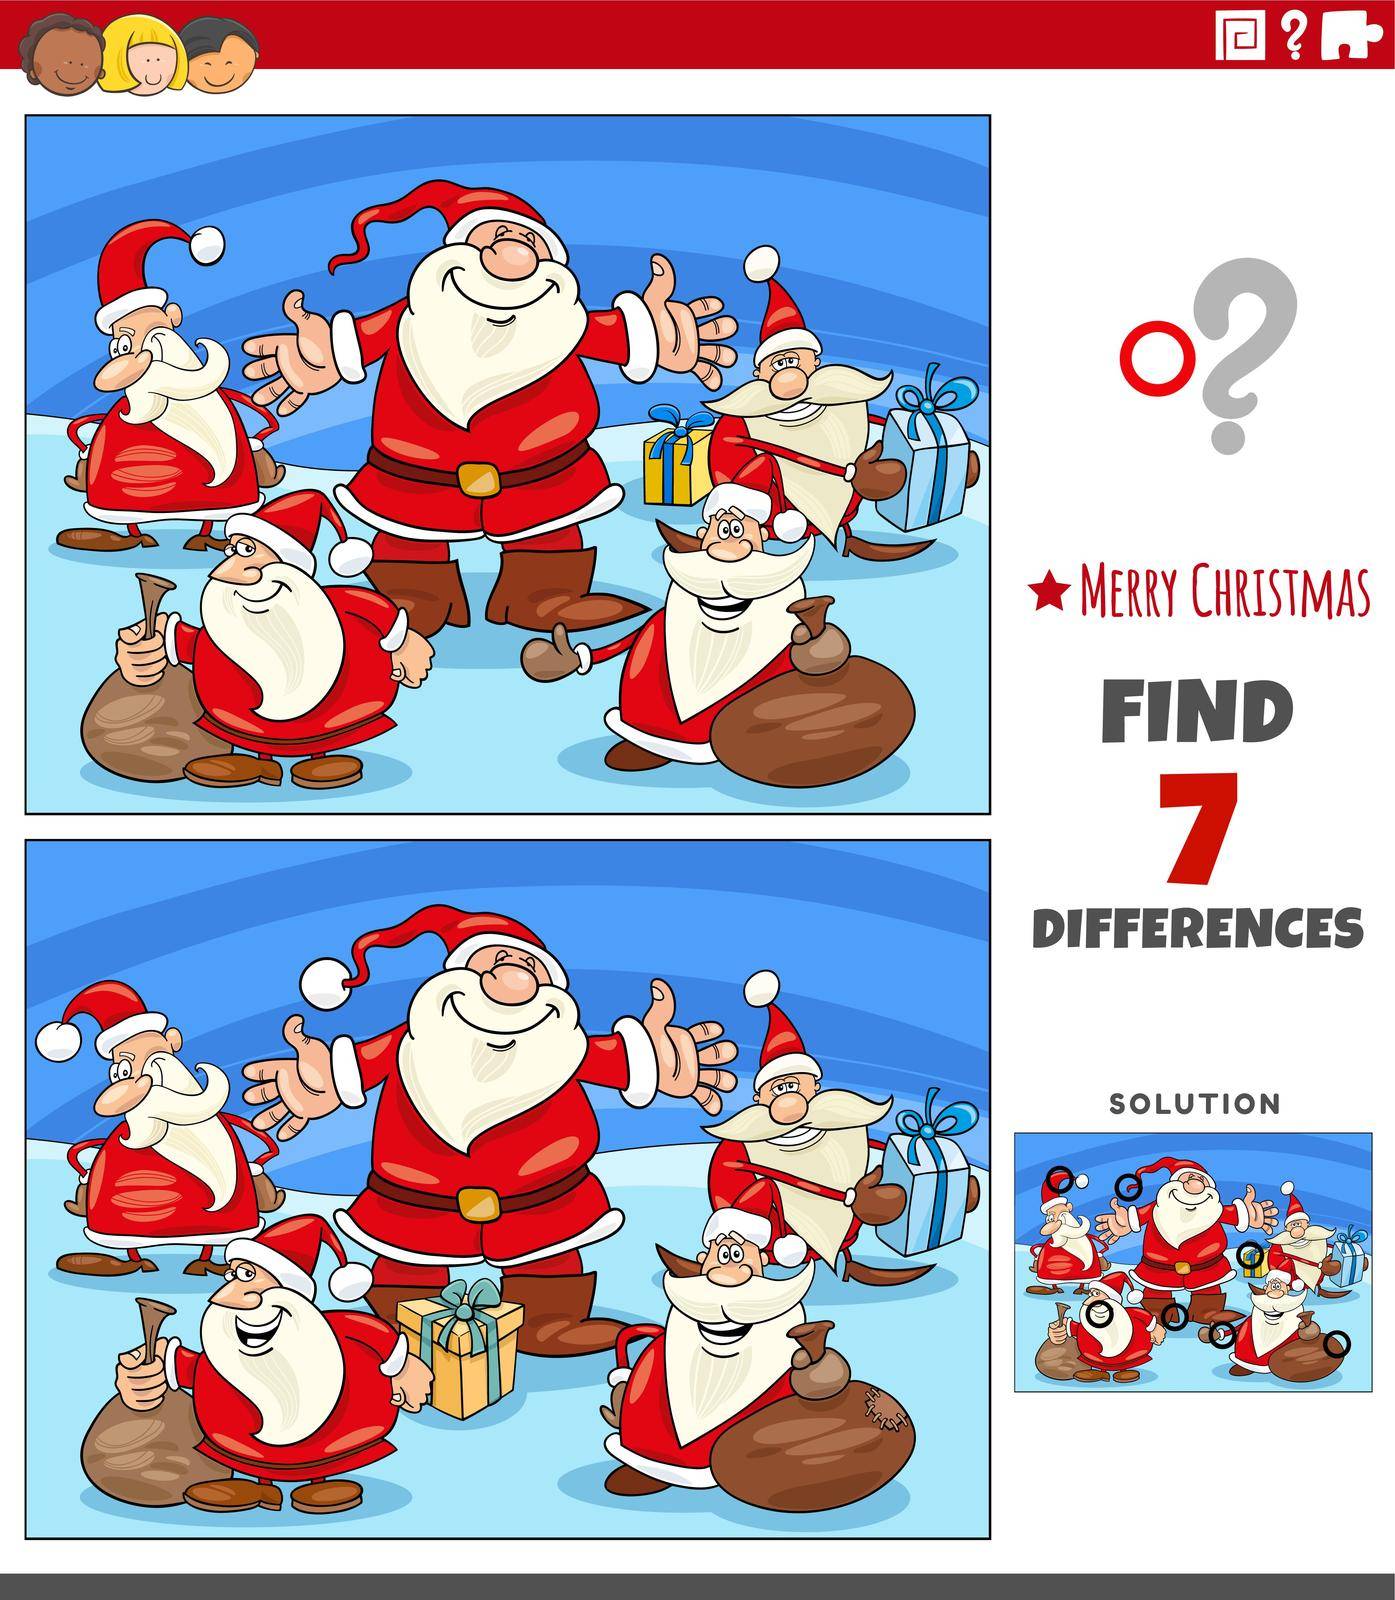 Cartoon illustration of finding differences between pictures educational game for children with Santa Claus characters on Christmas time